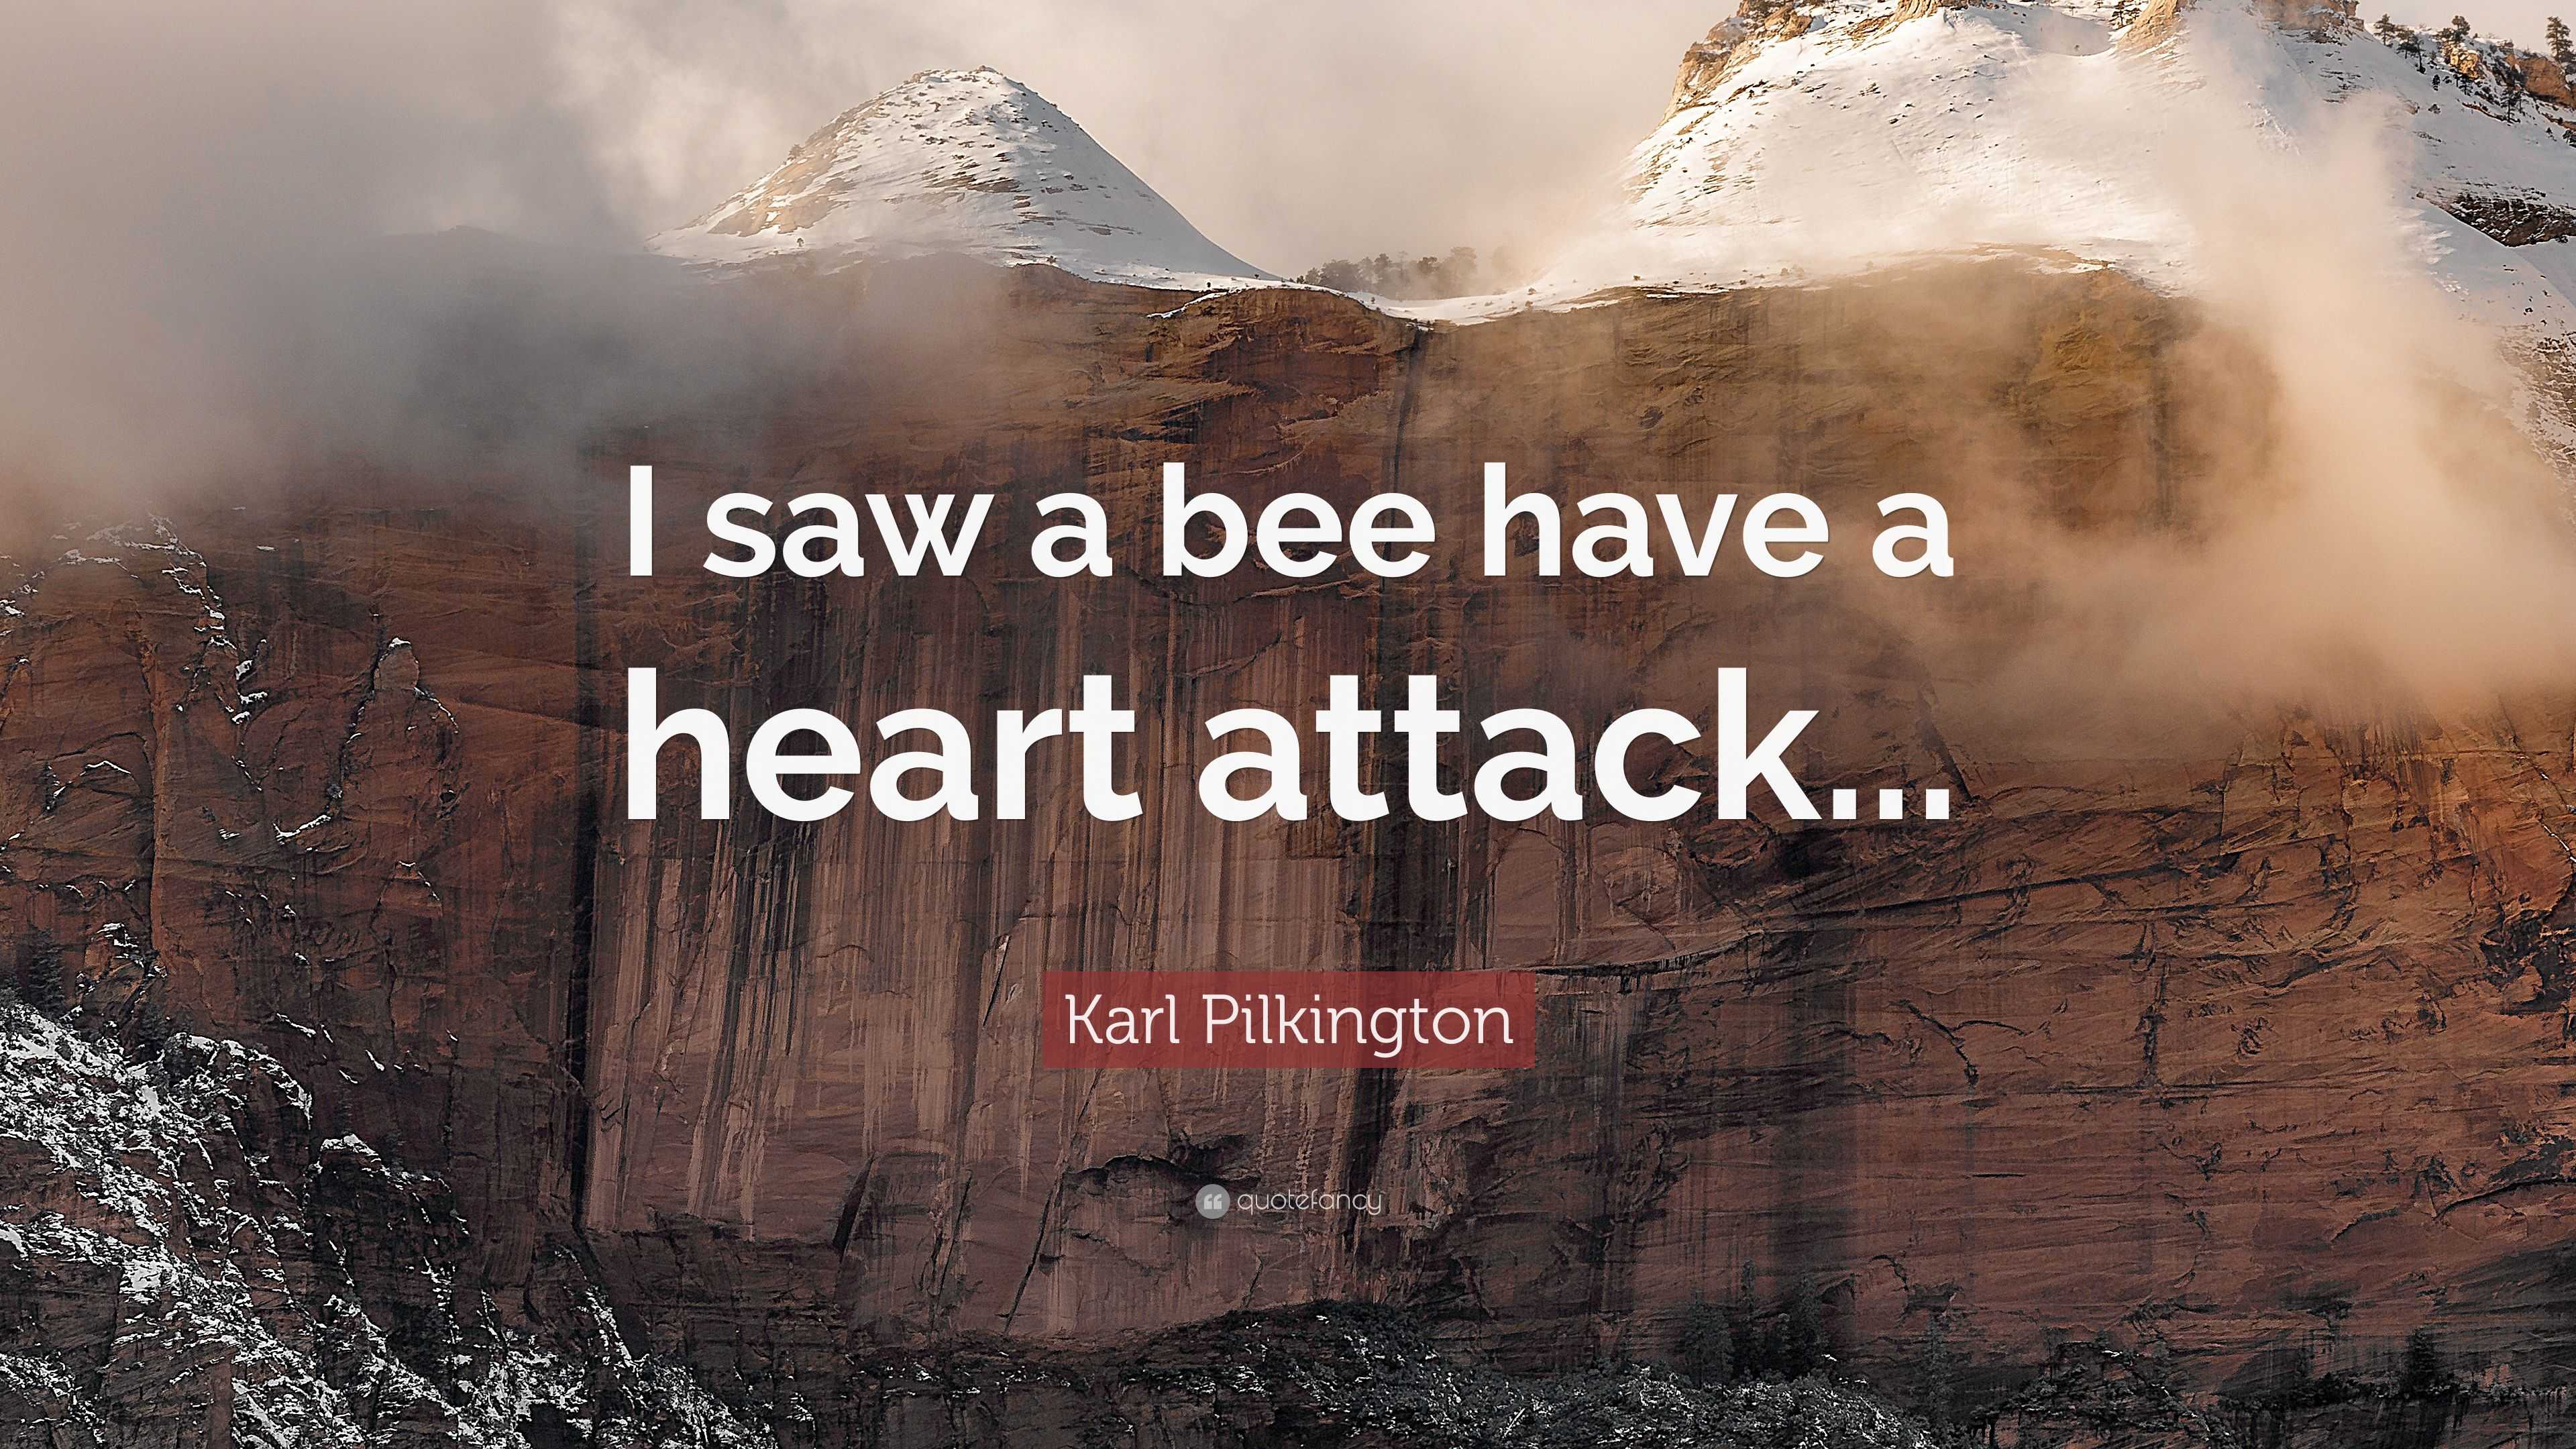 Karl Pilkington Quote “I saw a bee have a heart